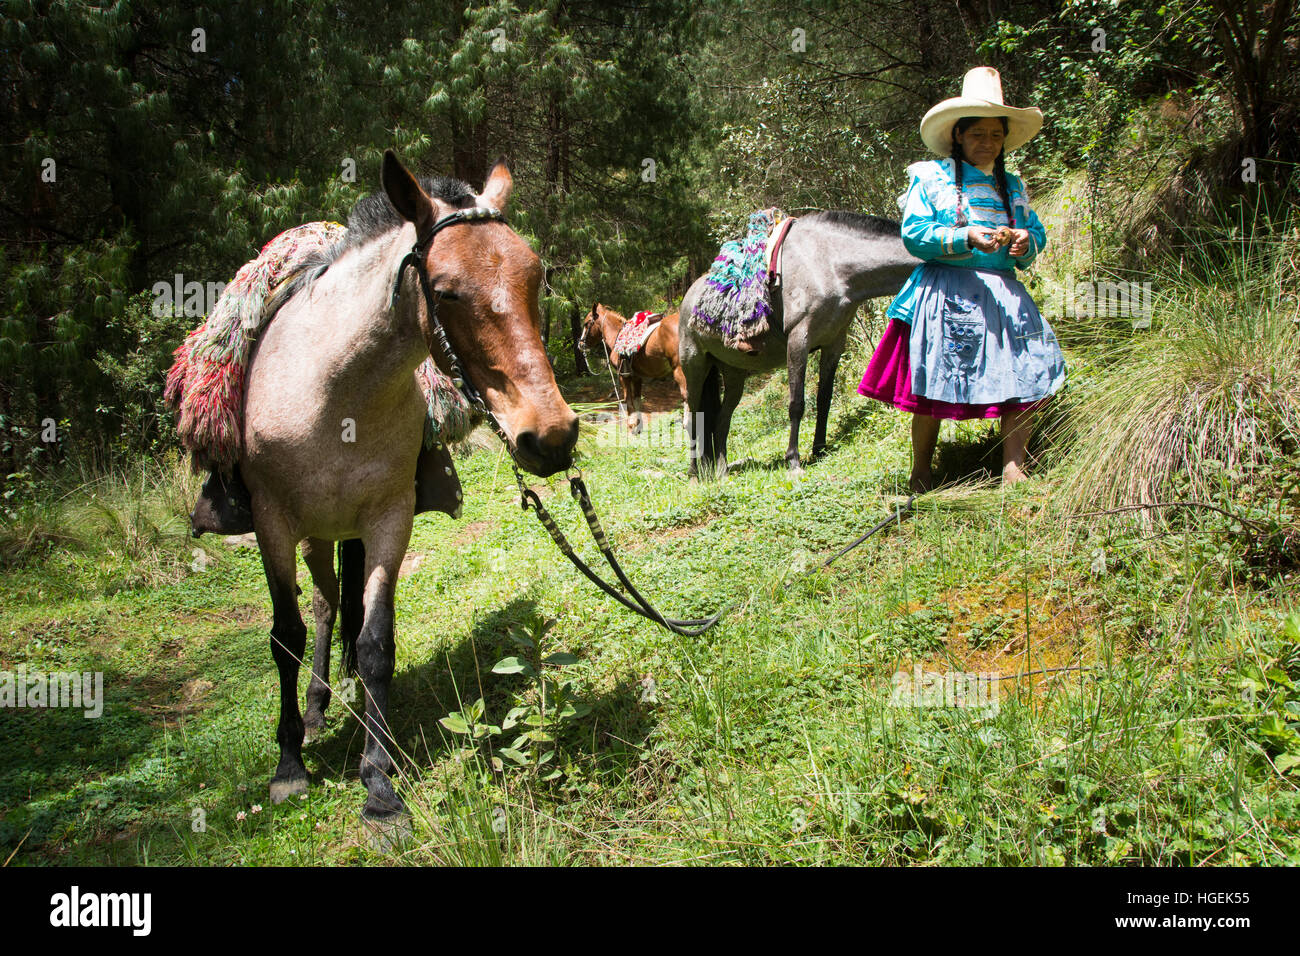 Woman in typical dress and hat of the Cajamarca region of northern Peru with horses in the countryside Stock Photo